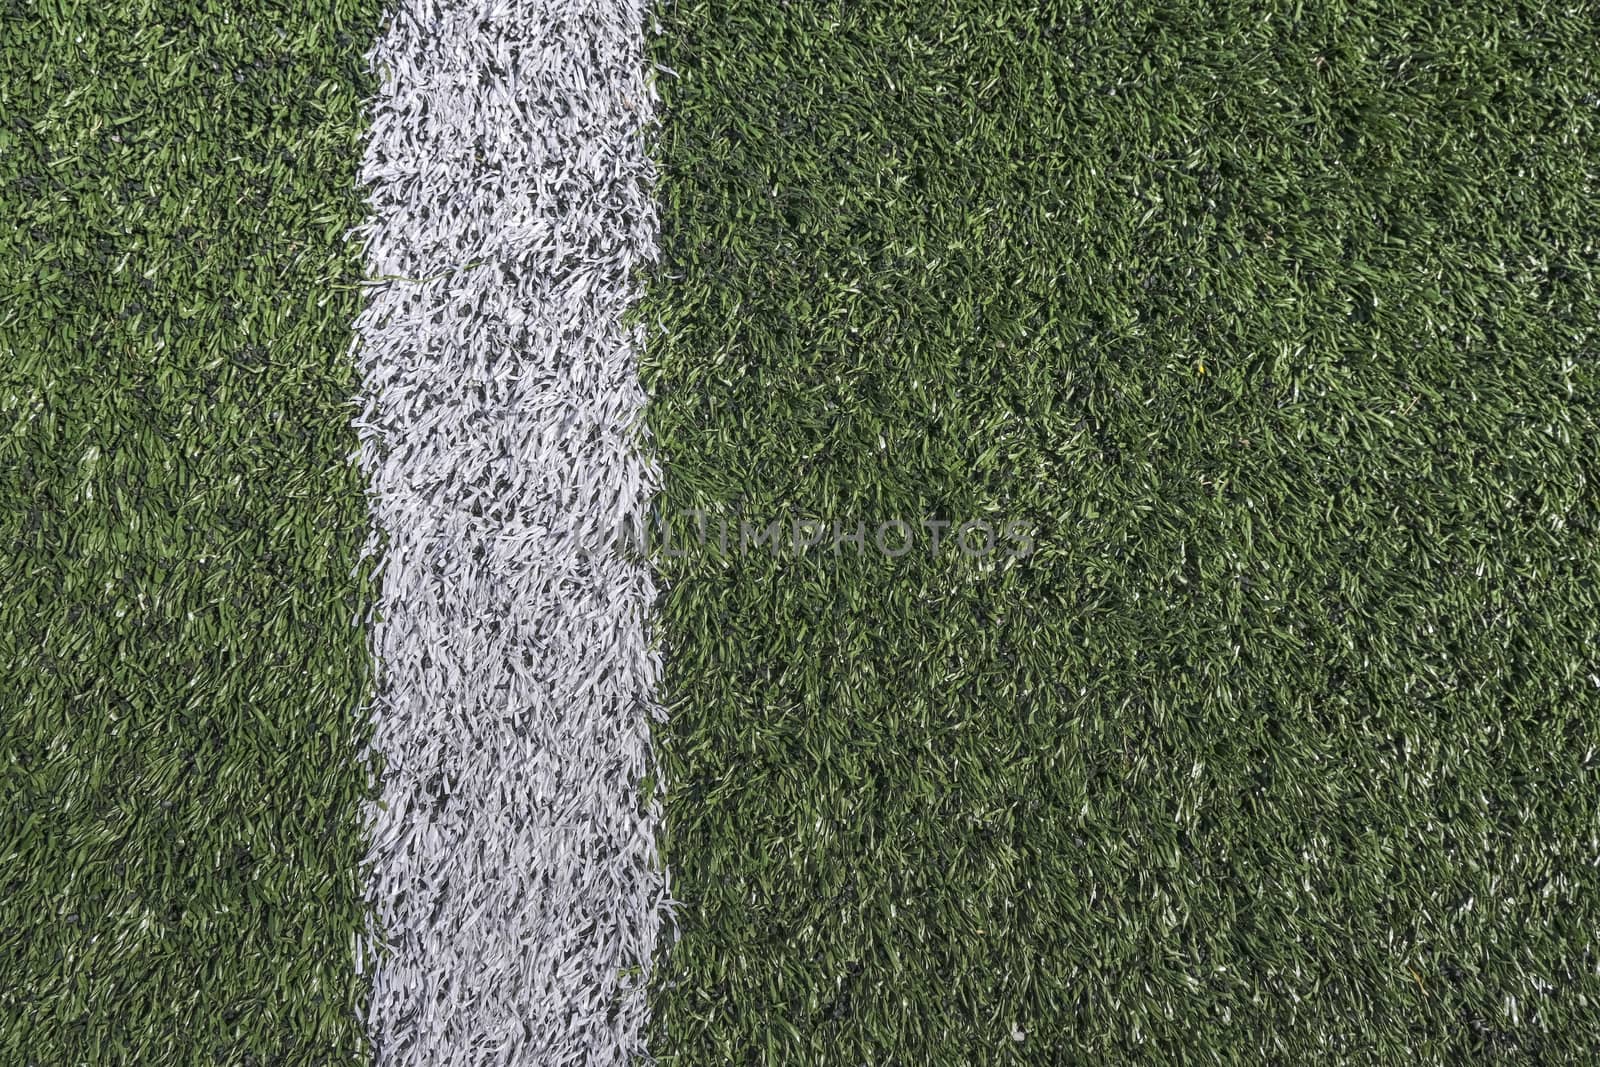 White stripe on a bright green artificial grass soccer field by Tjeerdkruse